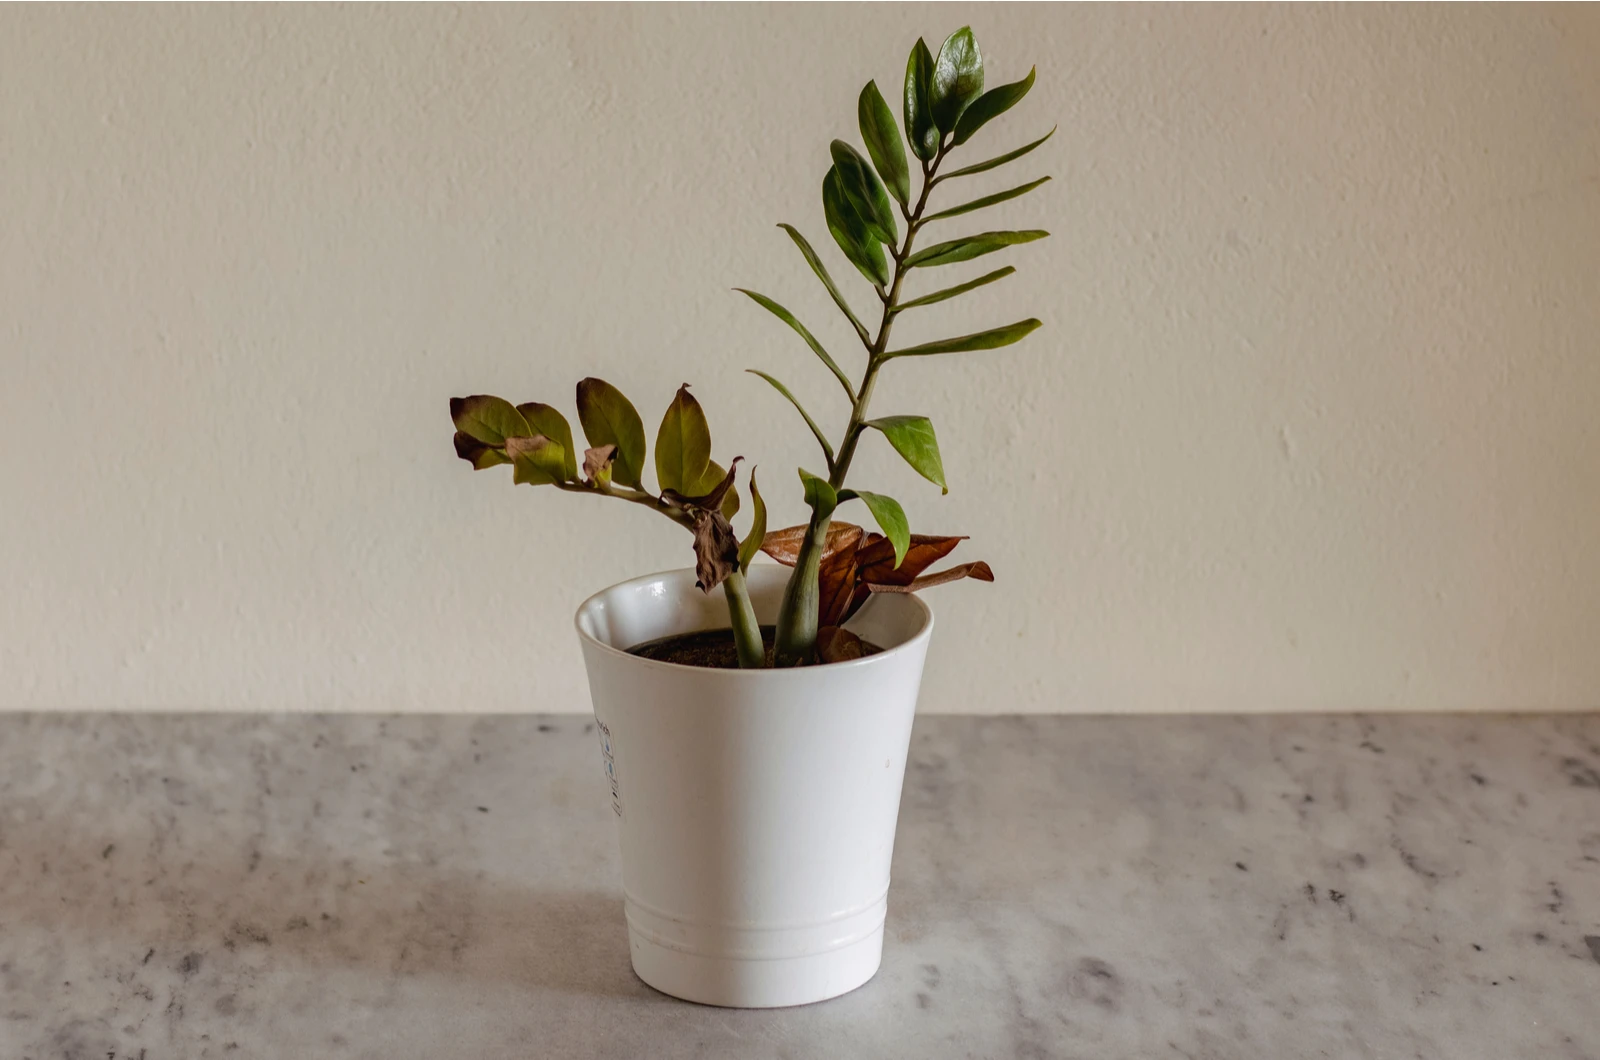 Dying Zamioculcas plant in a pot